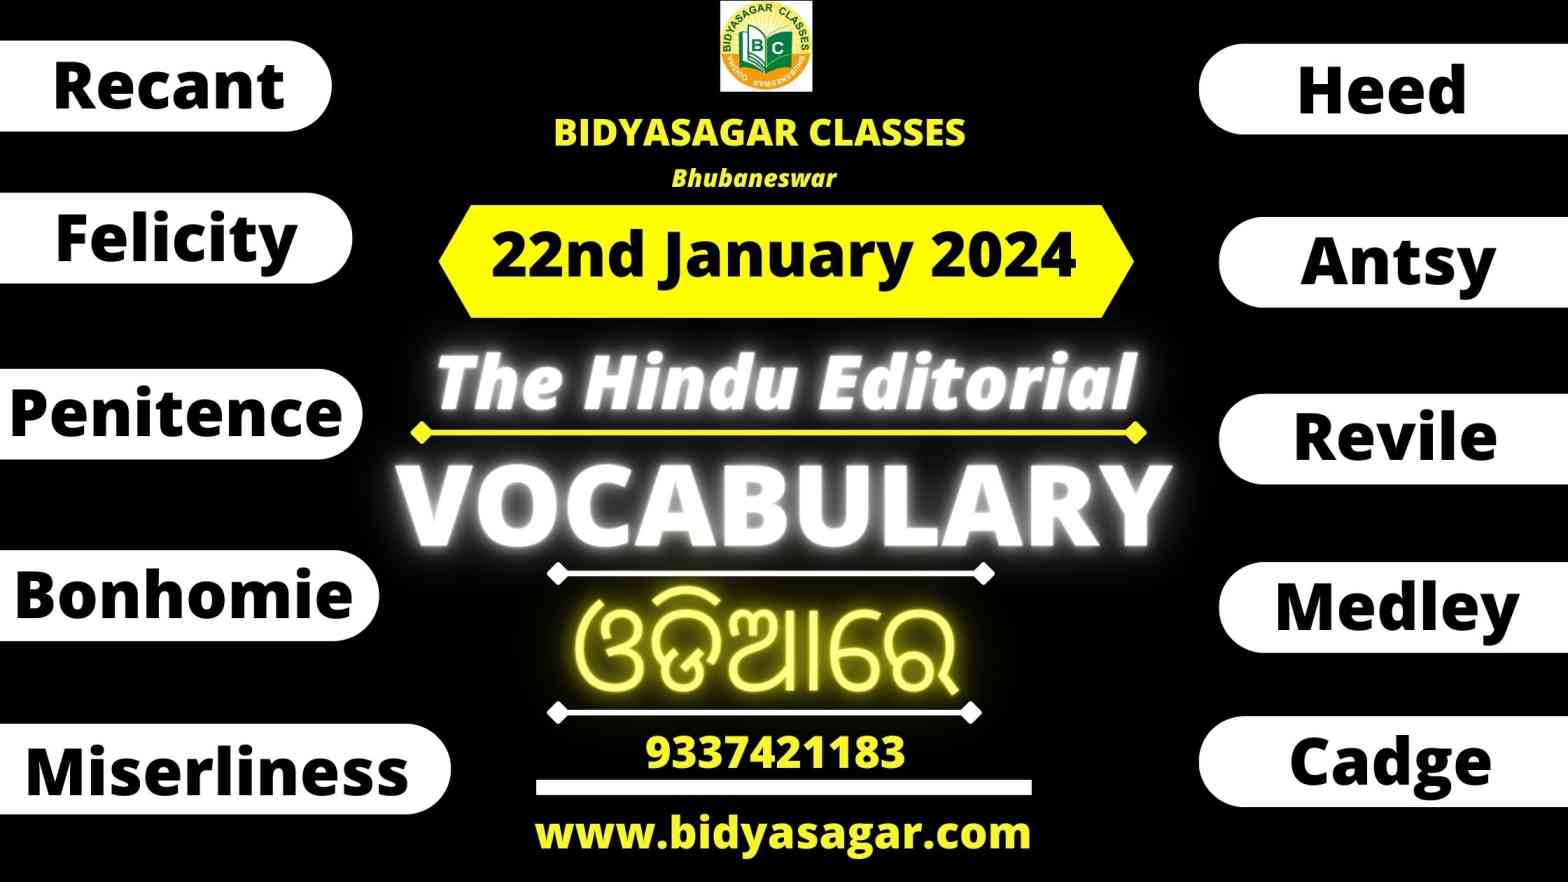 The Hindu Editorial Vocabulary of 22nd January 2024